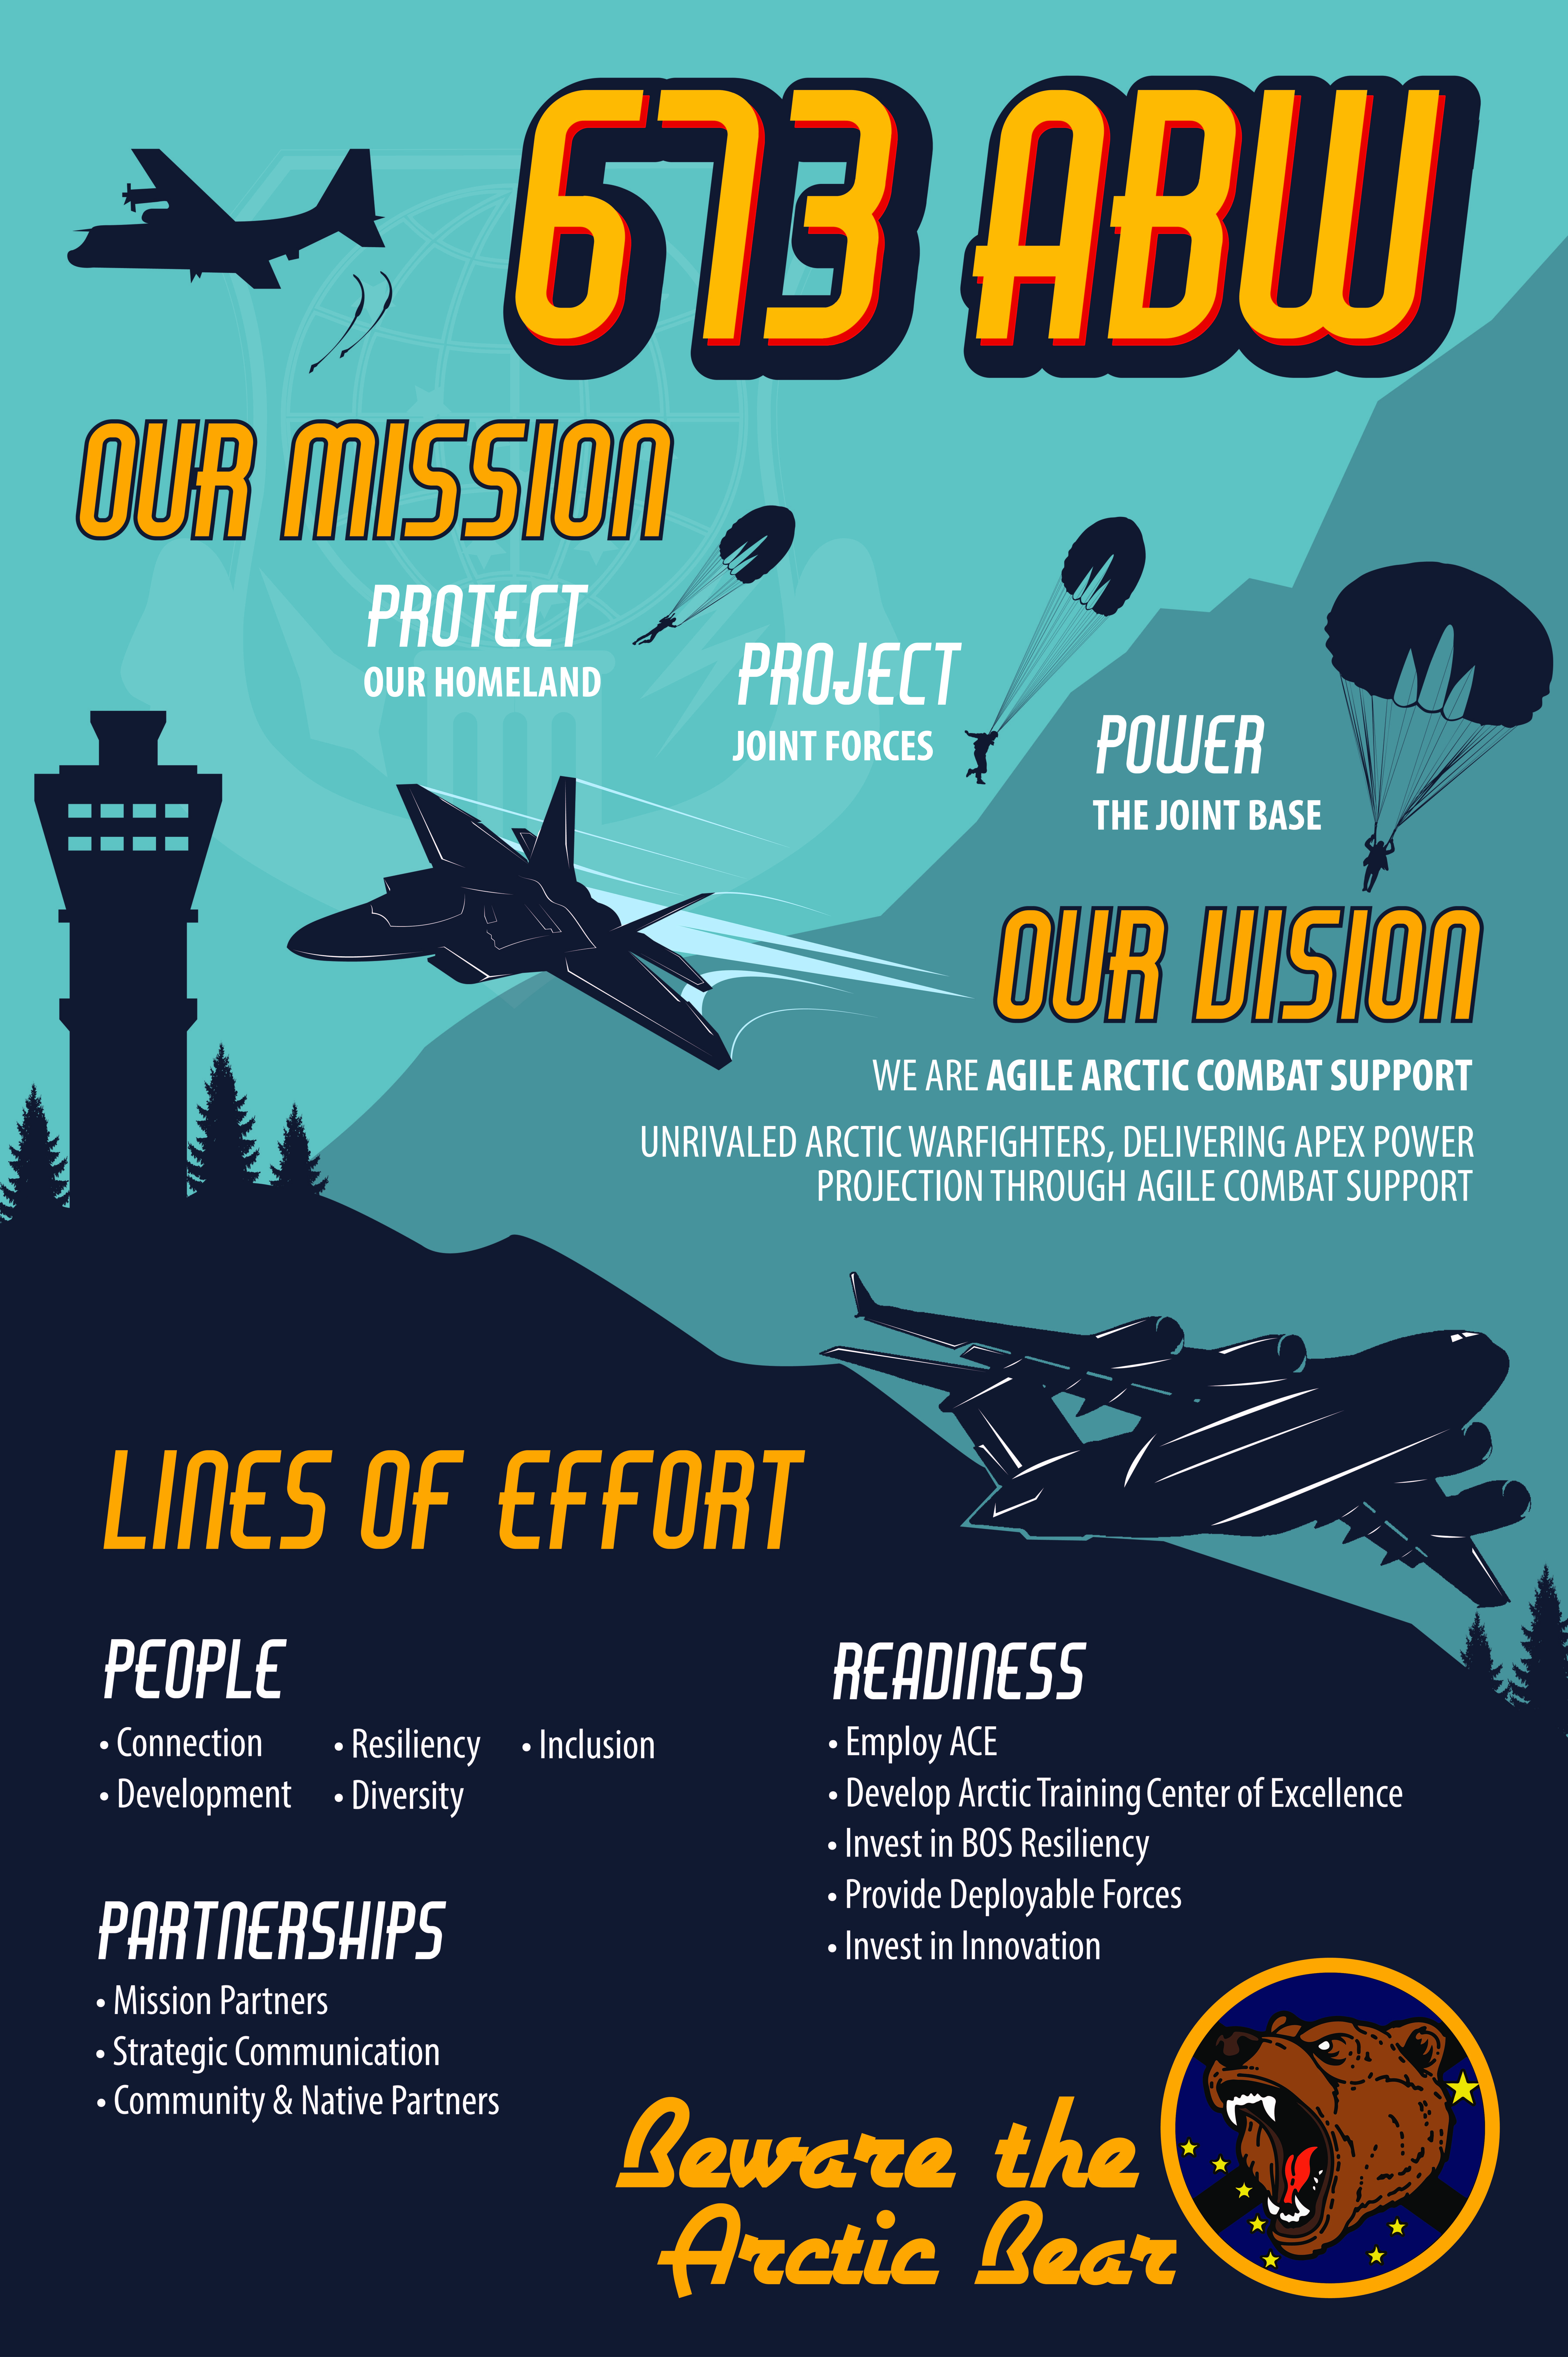 673d ABW mission vision priorities graphic